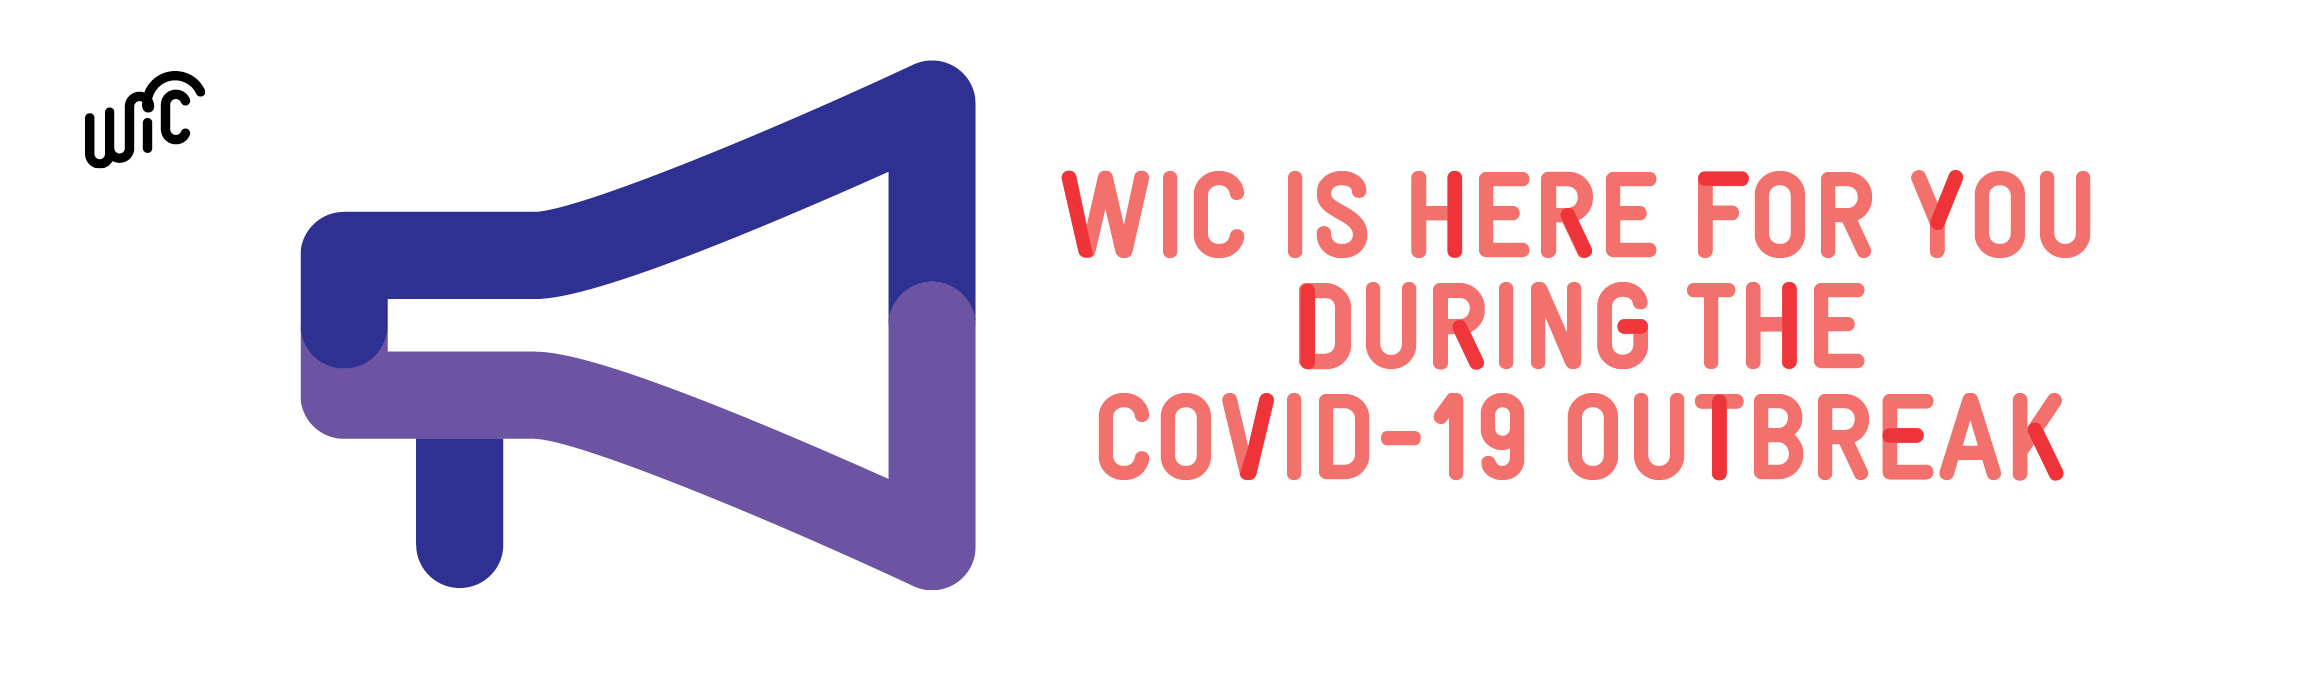 WIC is here for you during COVID 19